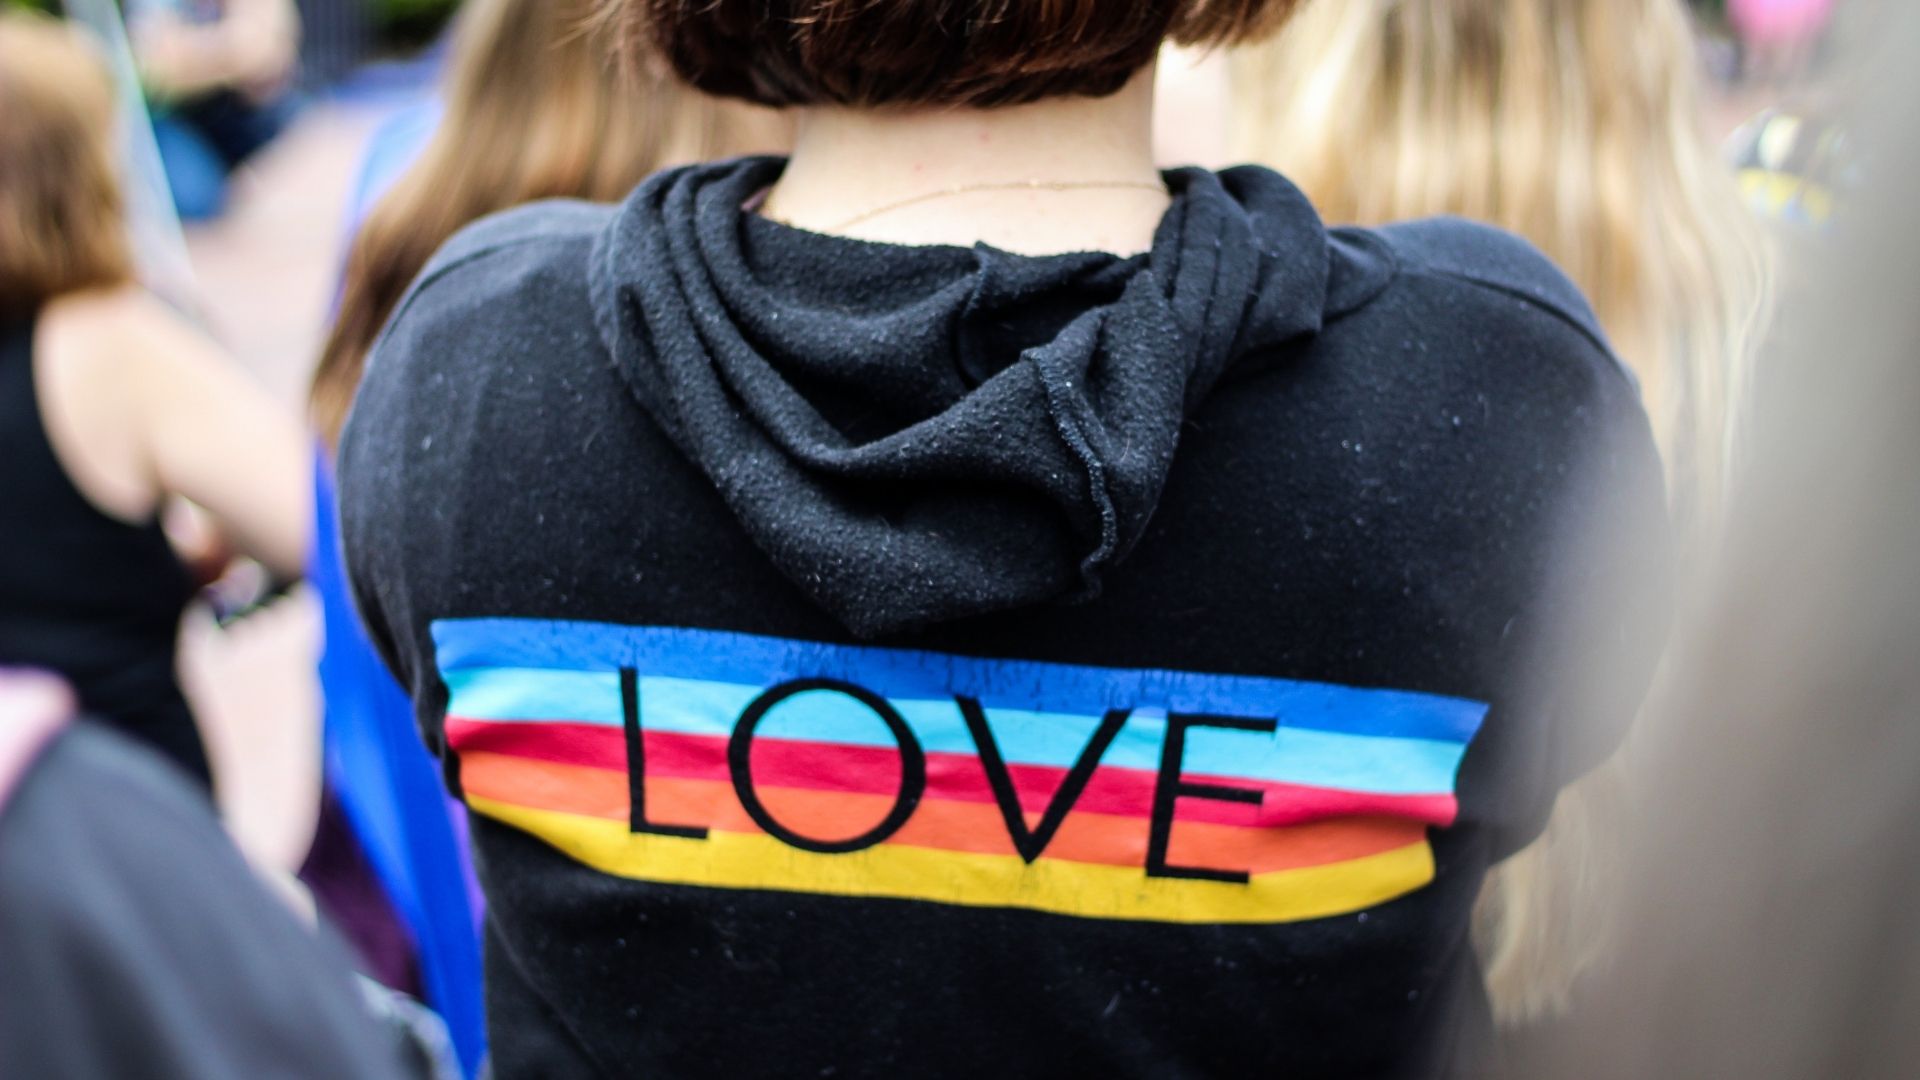 Don’t Feel Ashamed- Affirmation Therapy Can Boost Self-esteem in LGBTQ Individuals